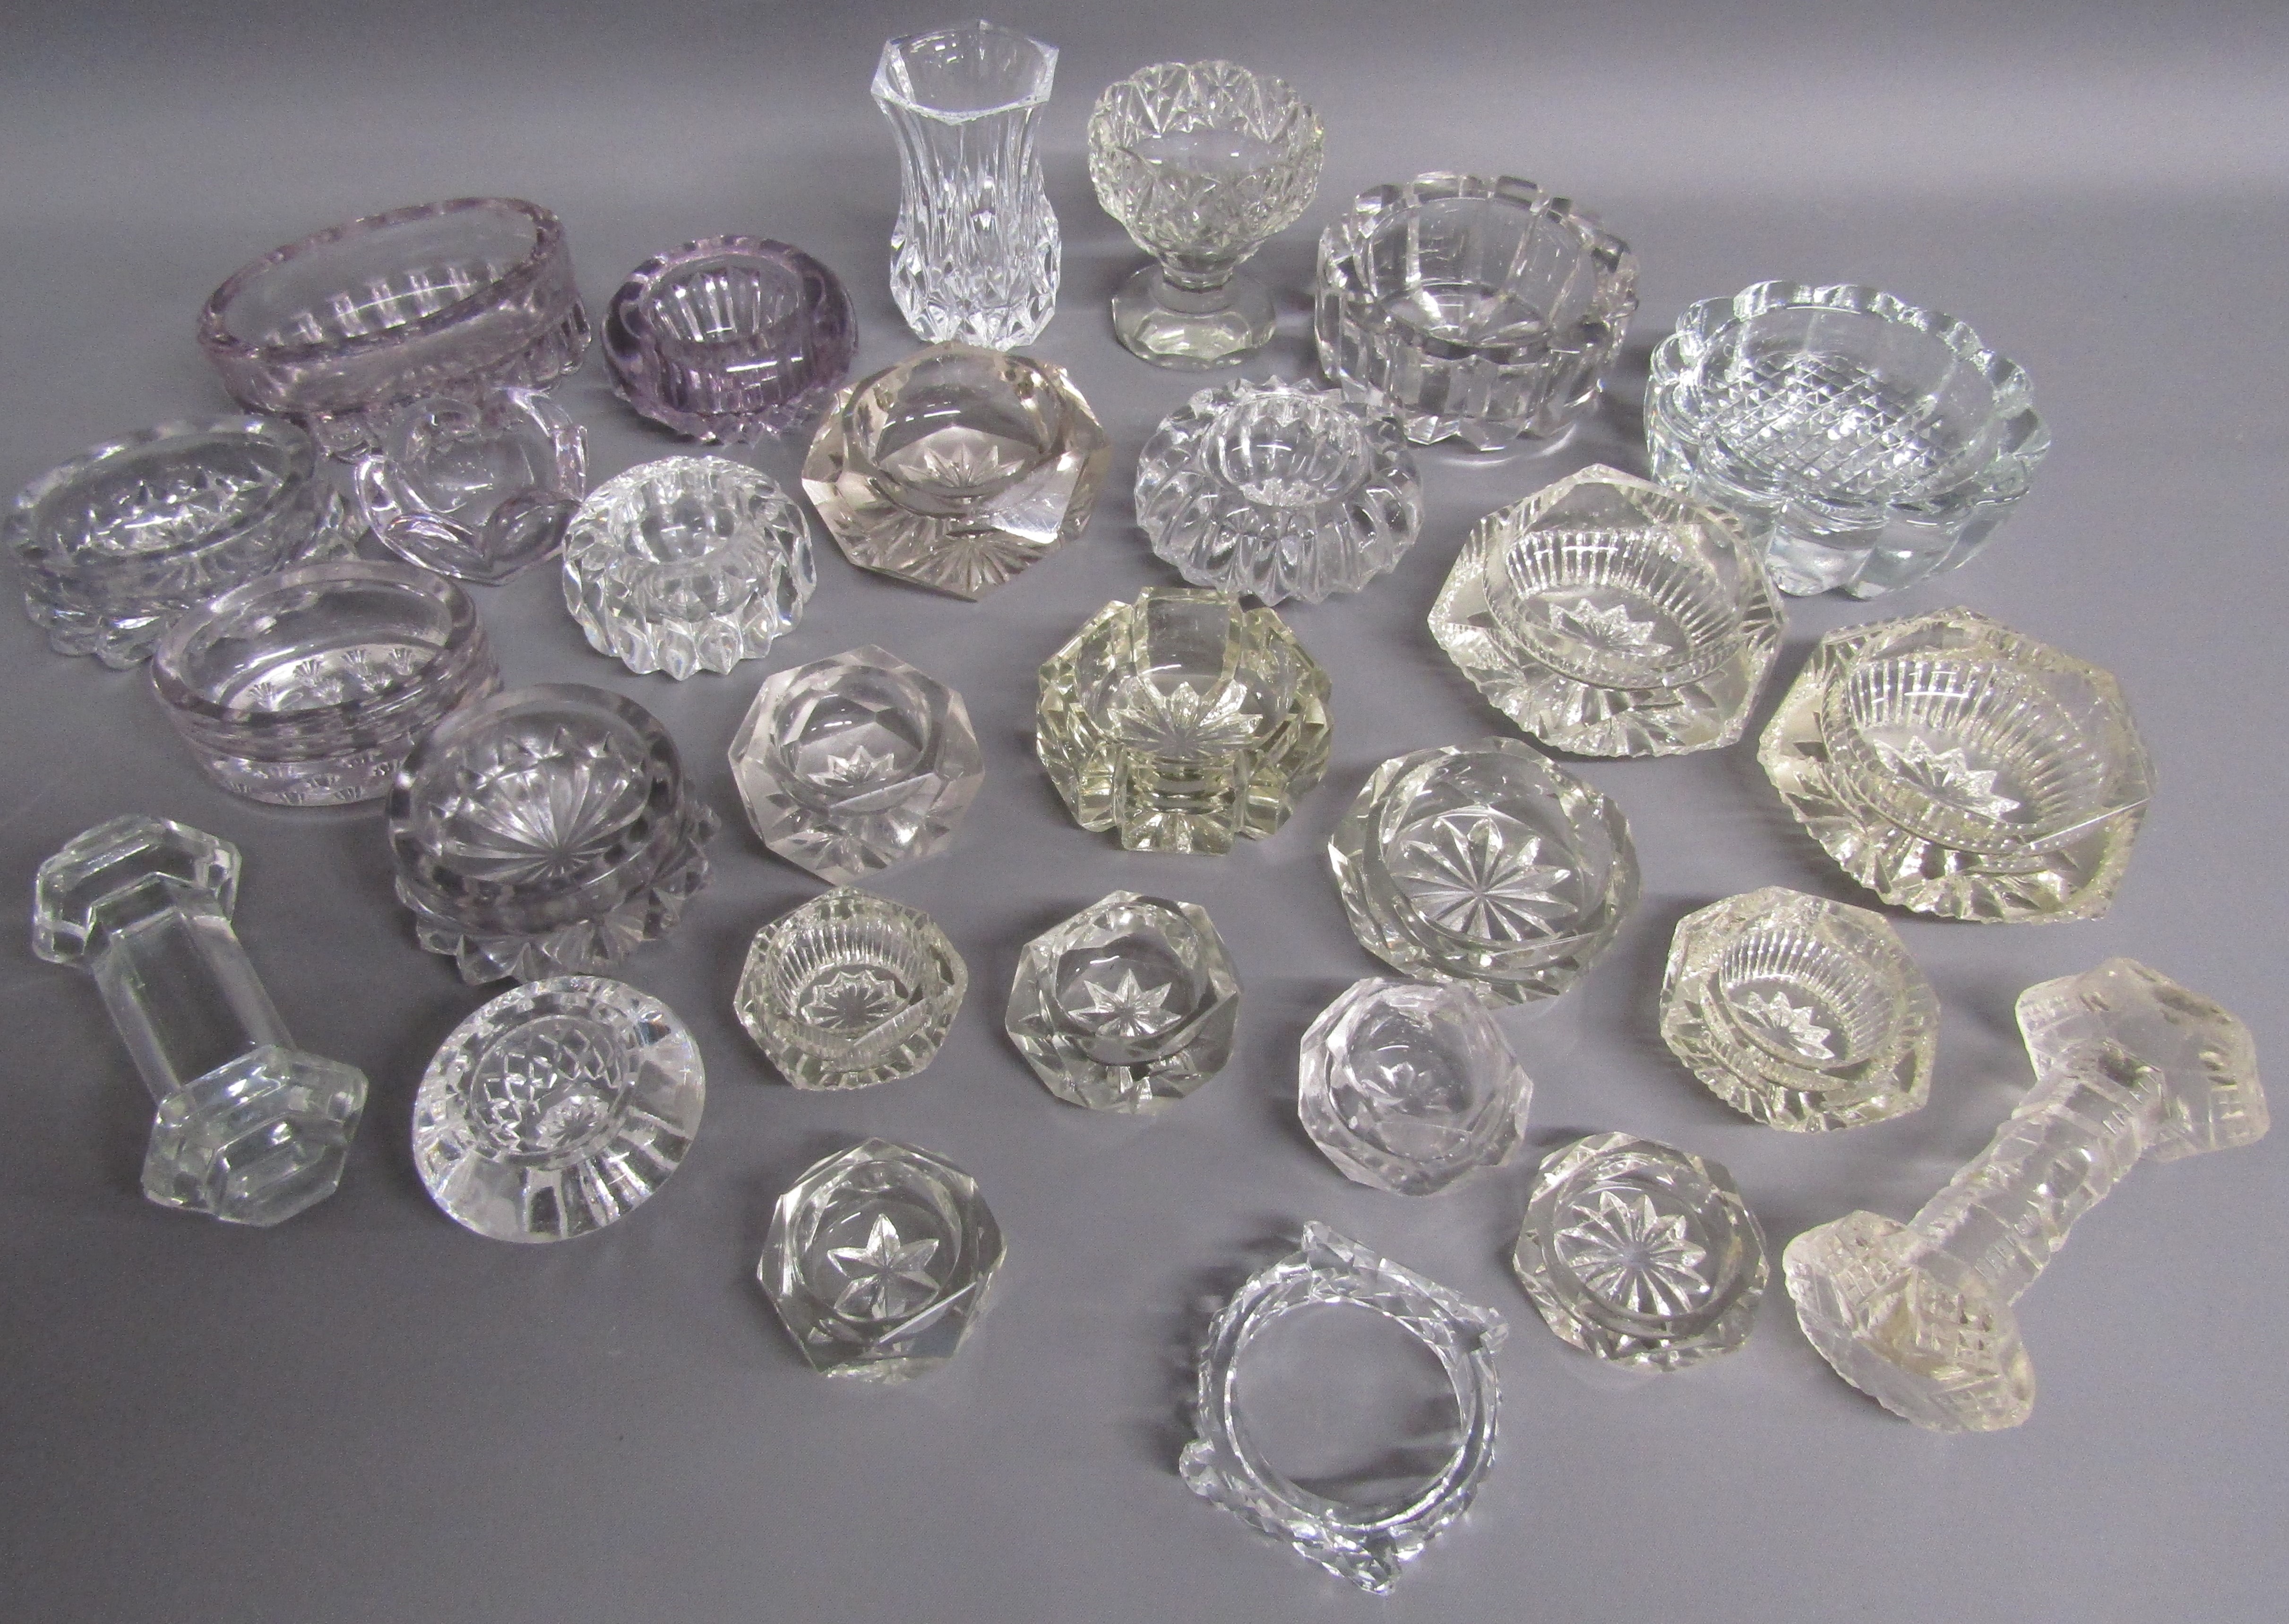 Collection of Victorian glassware